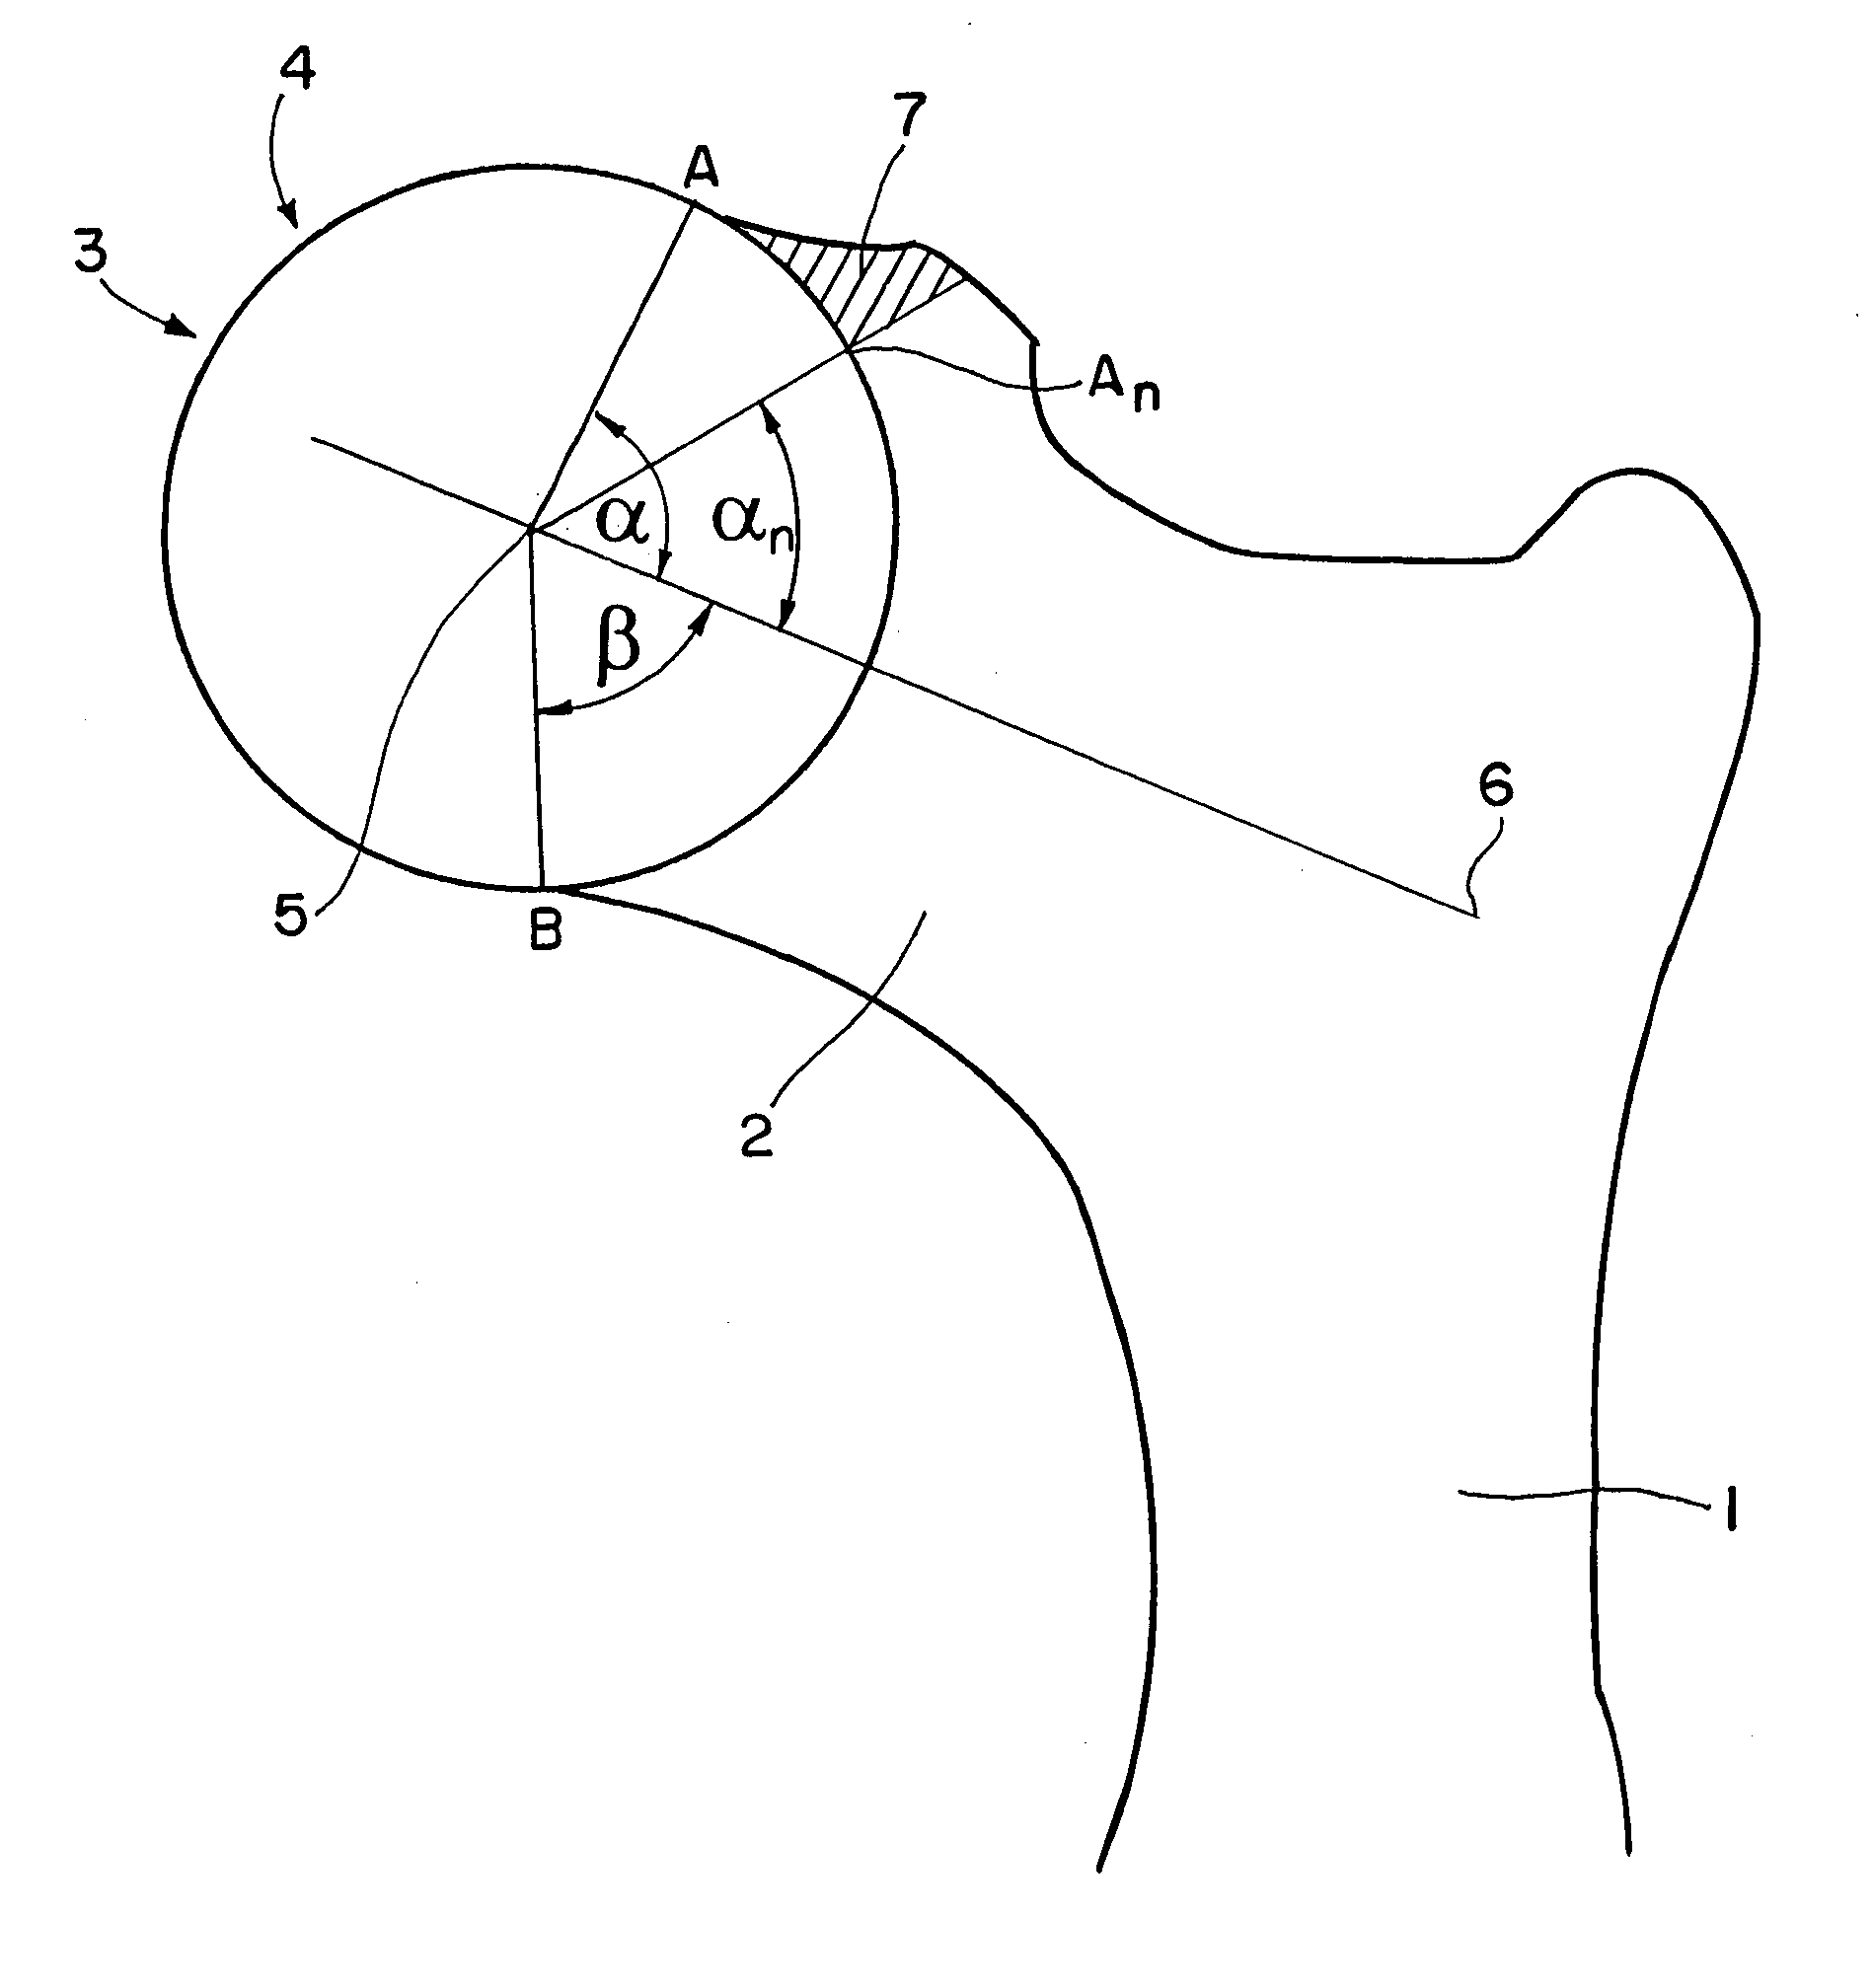 Computer-assisted planning method for correcting changes in the shape of joint bones